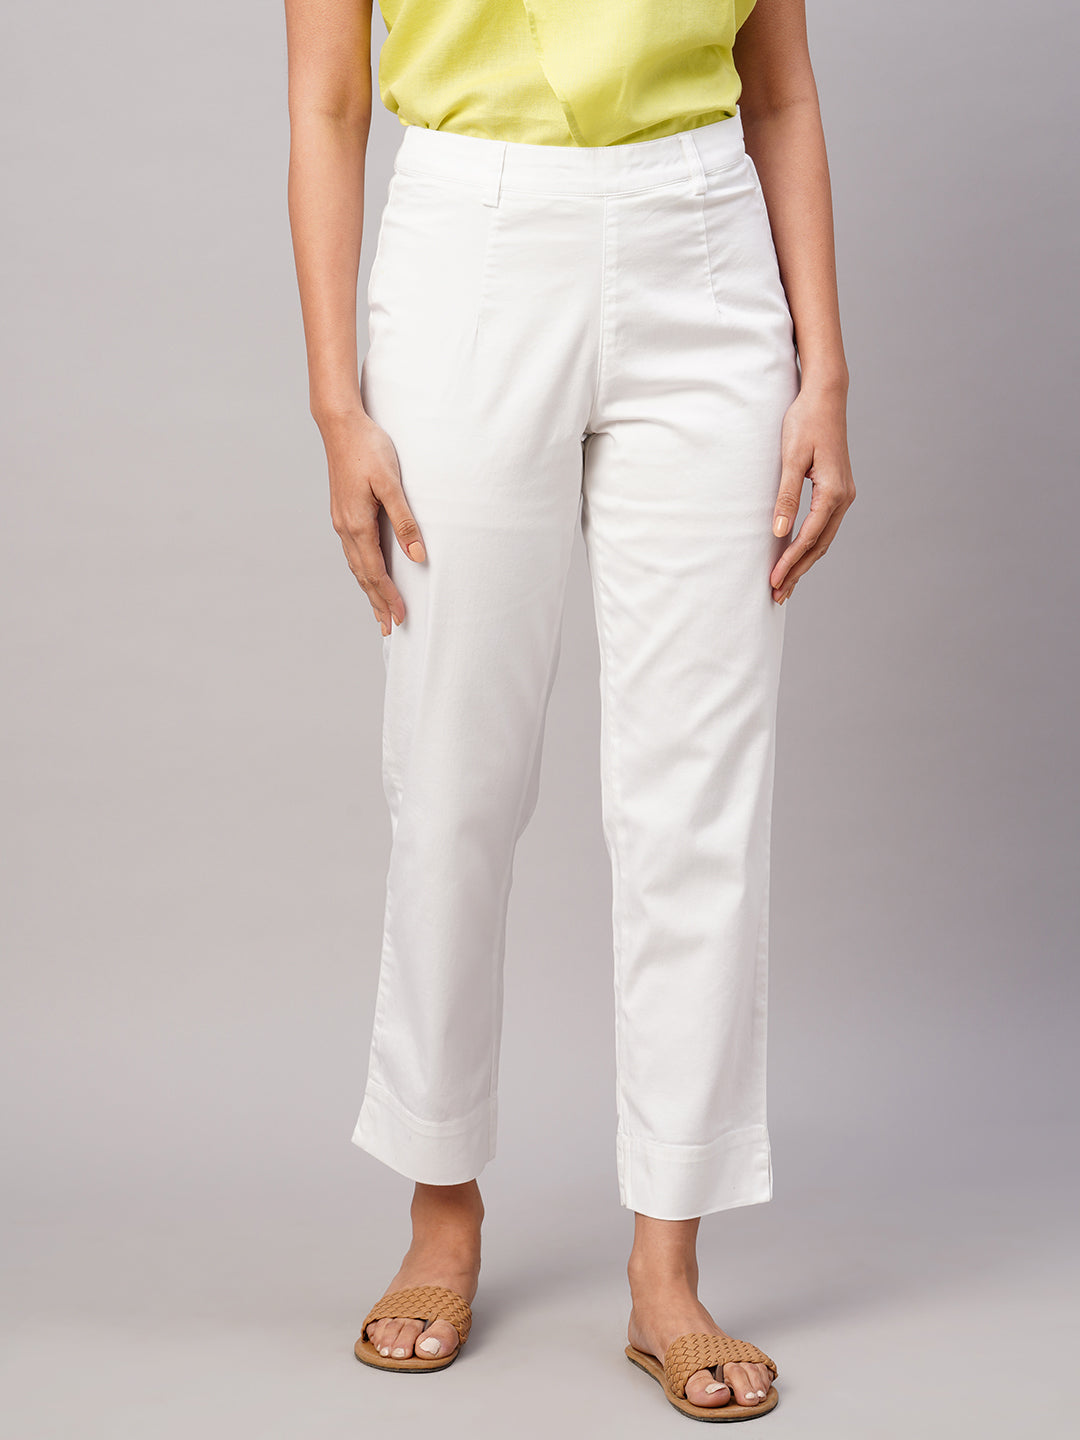 Buy Cotton Flat-Front Trousers Online at Best Prices in India - JioMart.